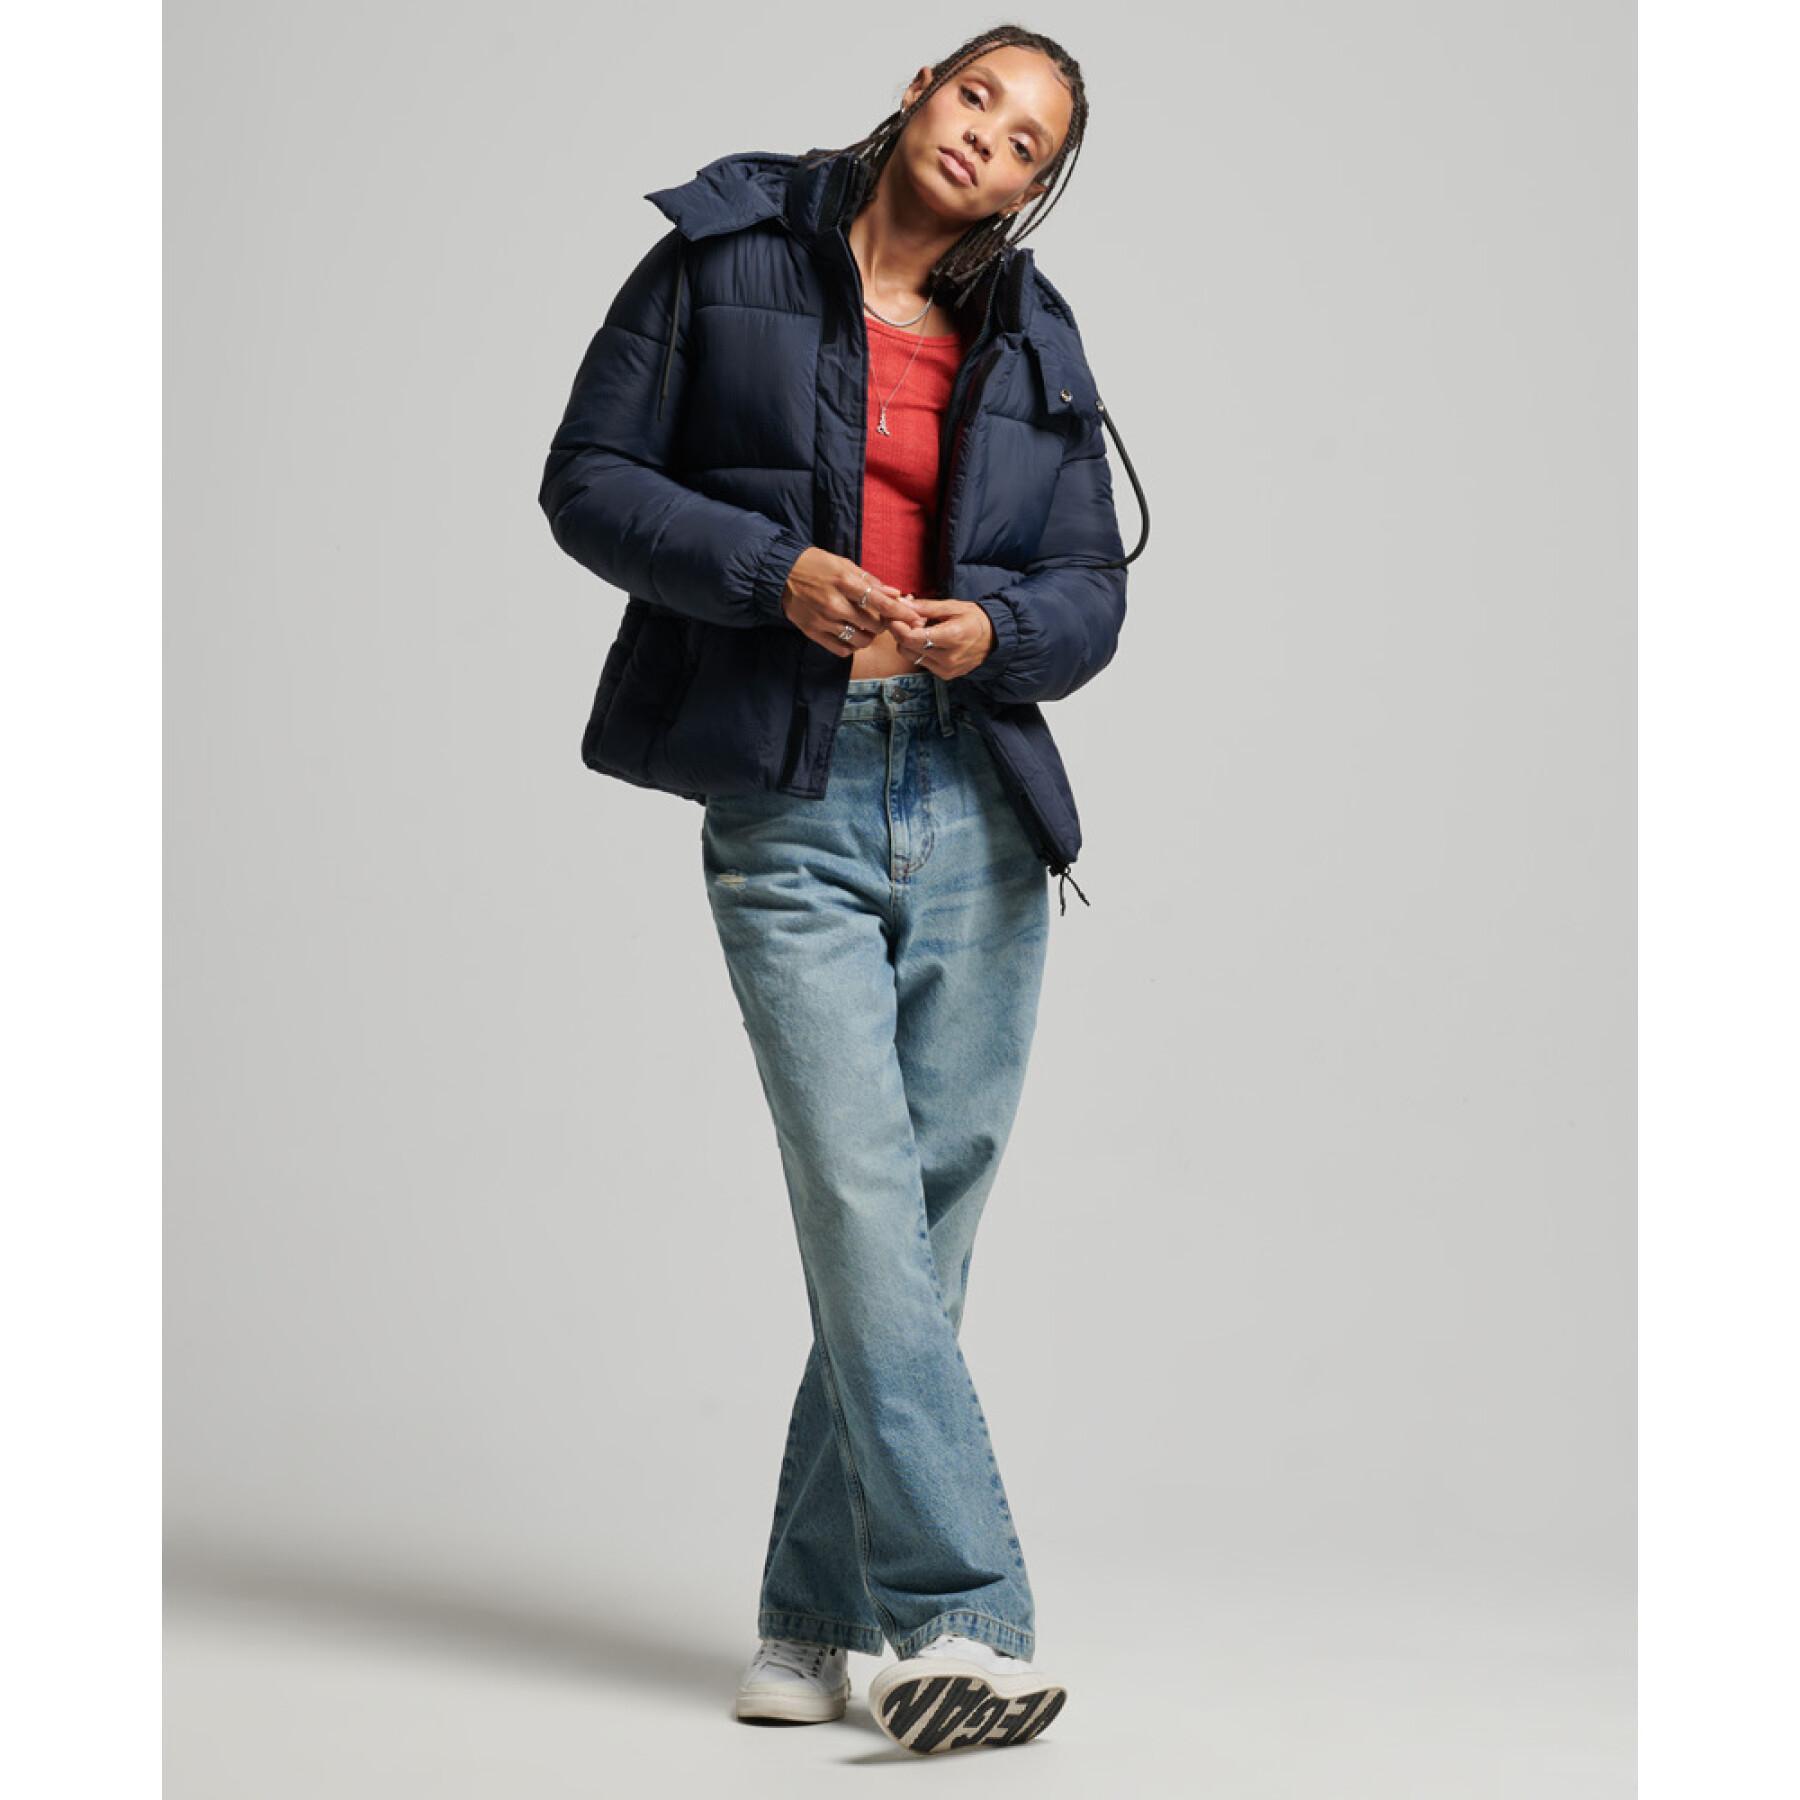 Hooded Puffer Jacket Superdry Ripstop